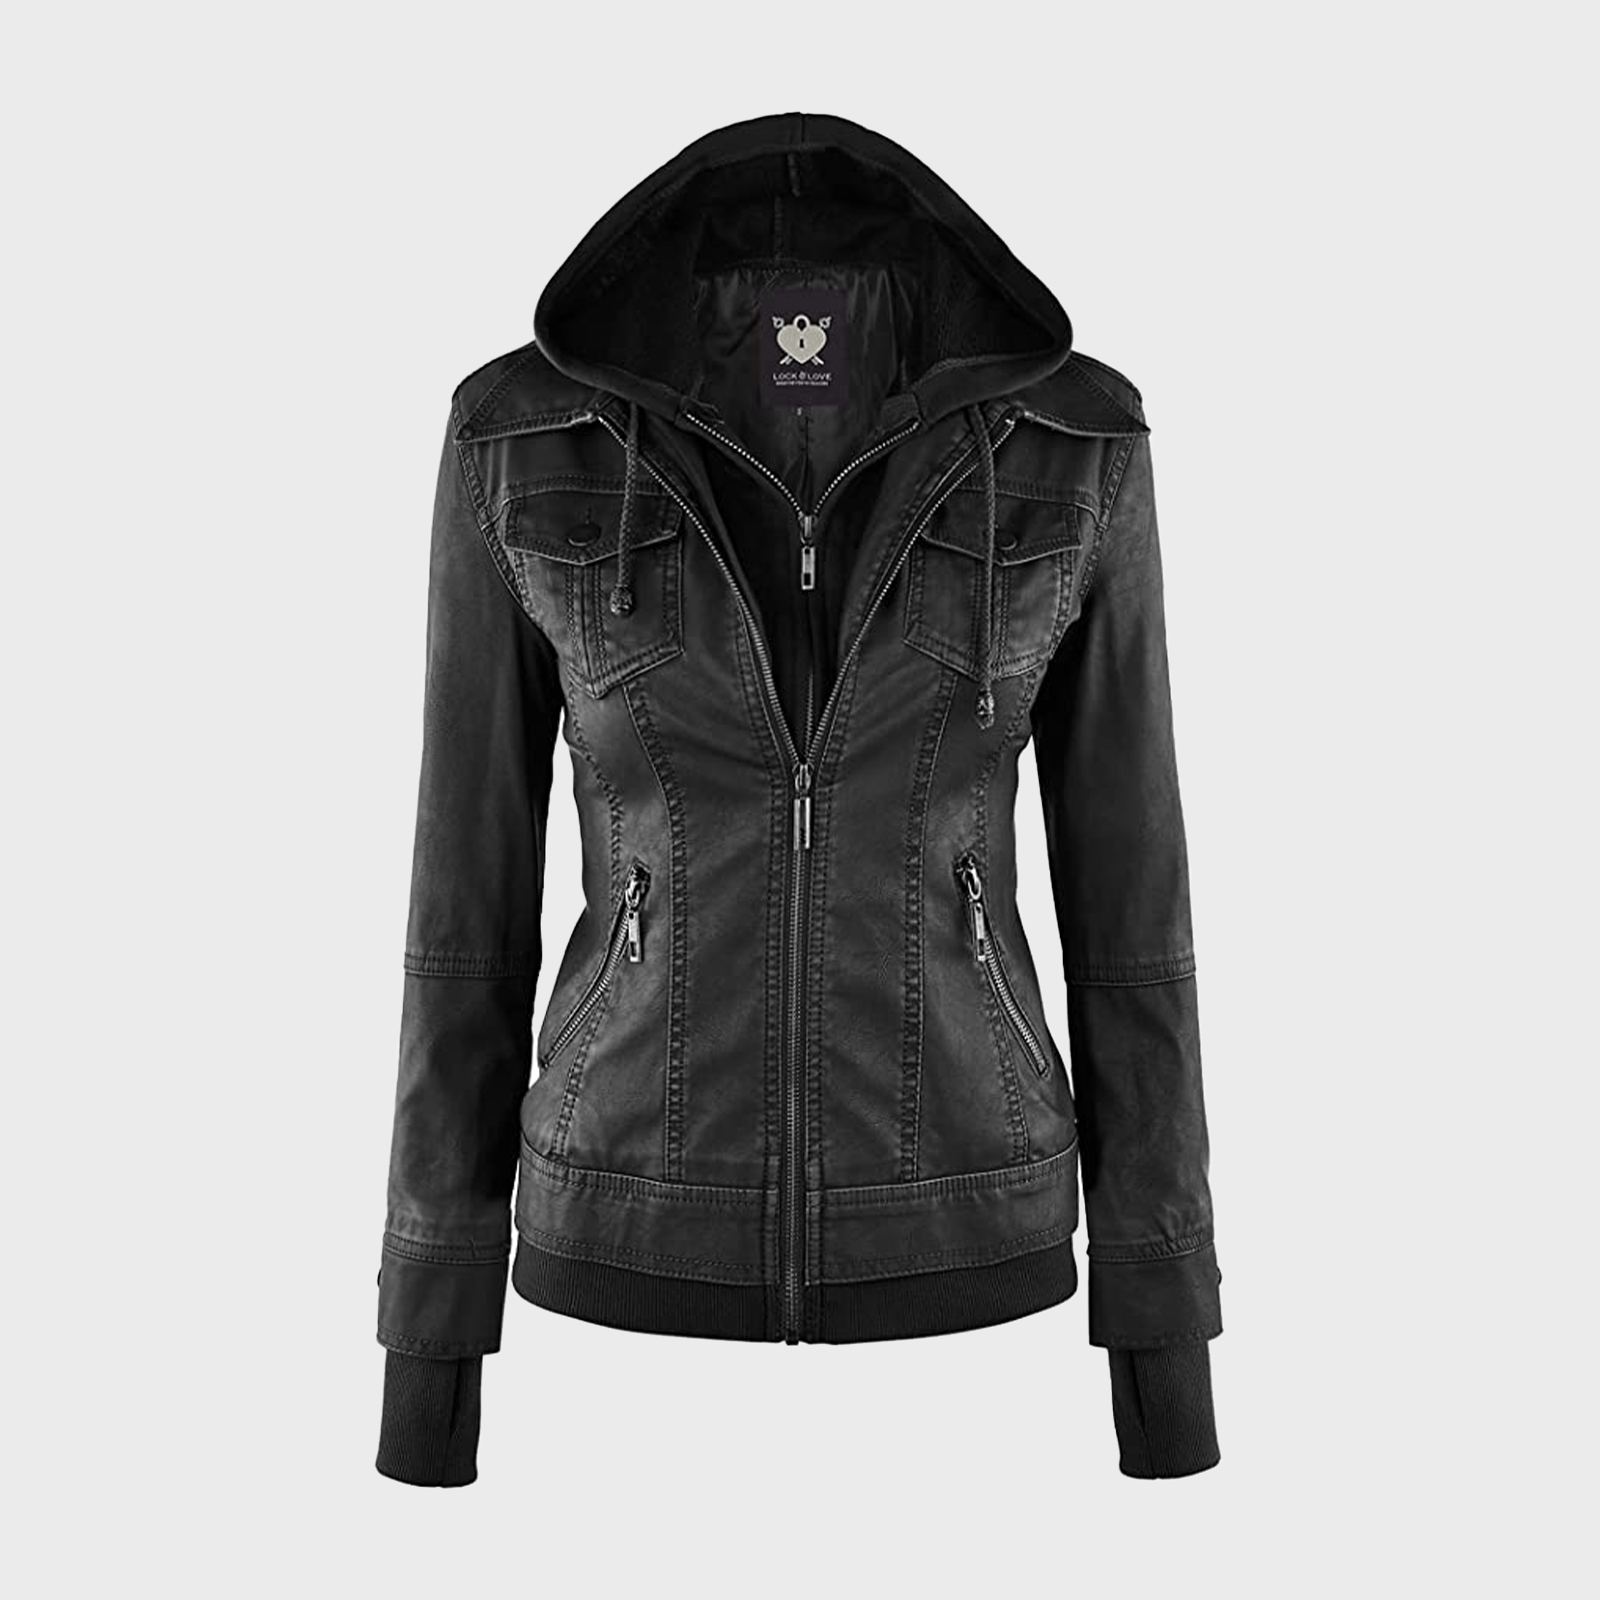 Lock And Love Womens Removable Hooded Faux Leather Jacket Moto Biker Coat Ecomm Via Amazon.com